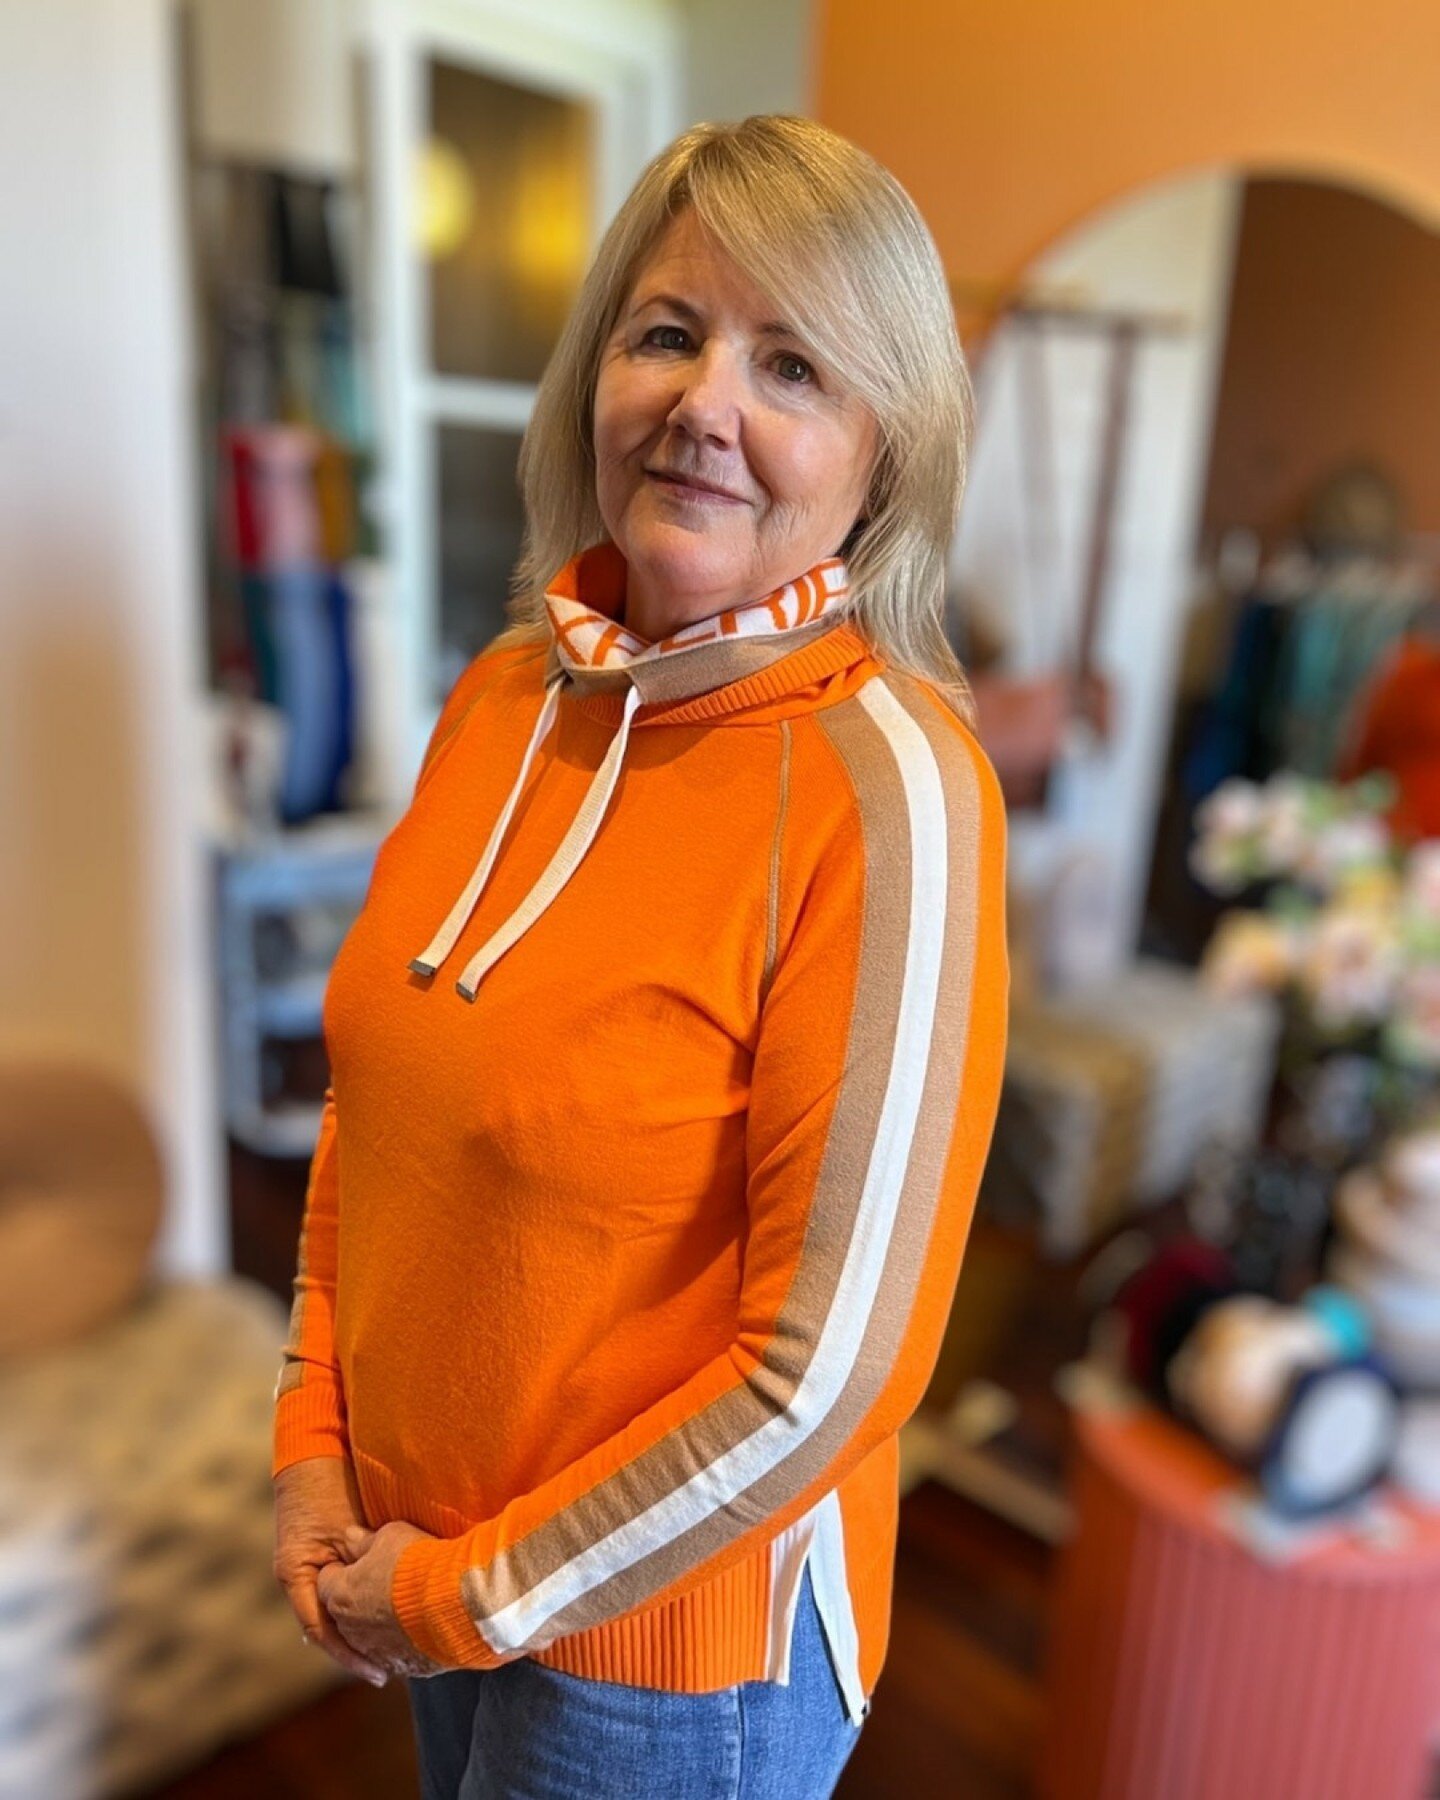 Have you met our new lovely staff member Kerrie?

She's a wonderful local, known to so many across the mountains, as she has lived and worked here for over 35 years. 

We are so privileged to have her join our team.

Here she is looking gorgeous mode